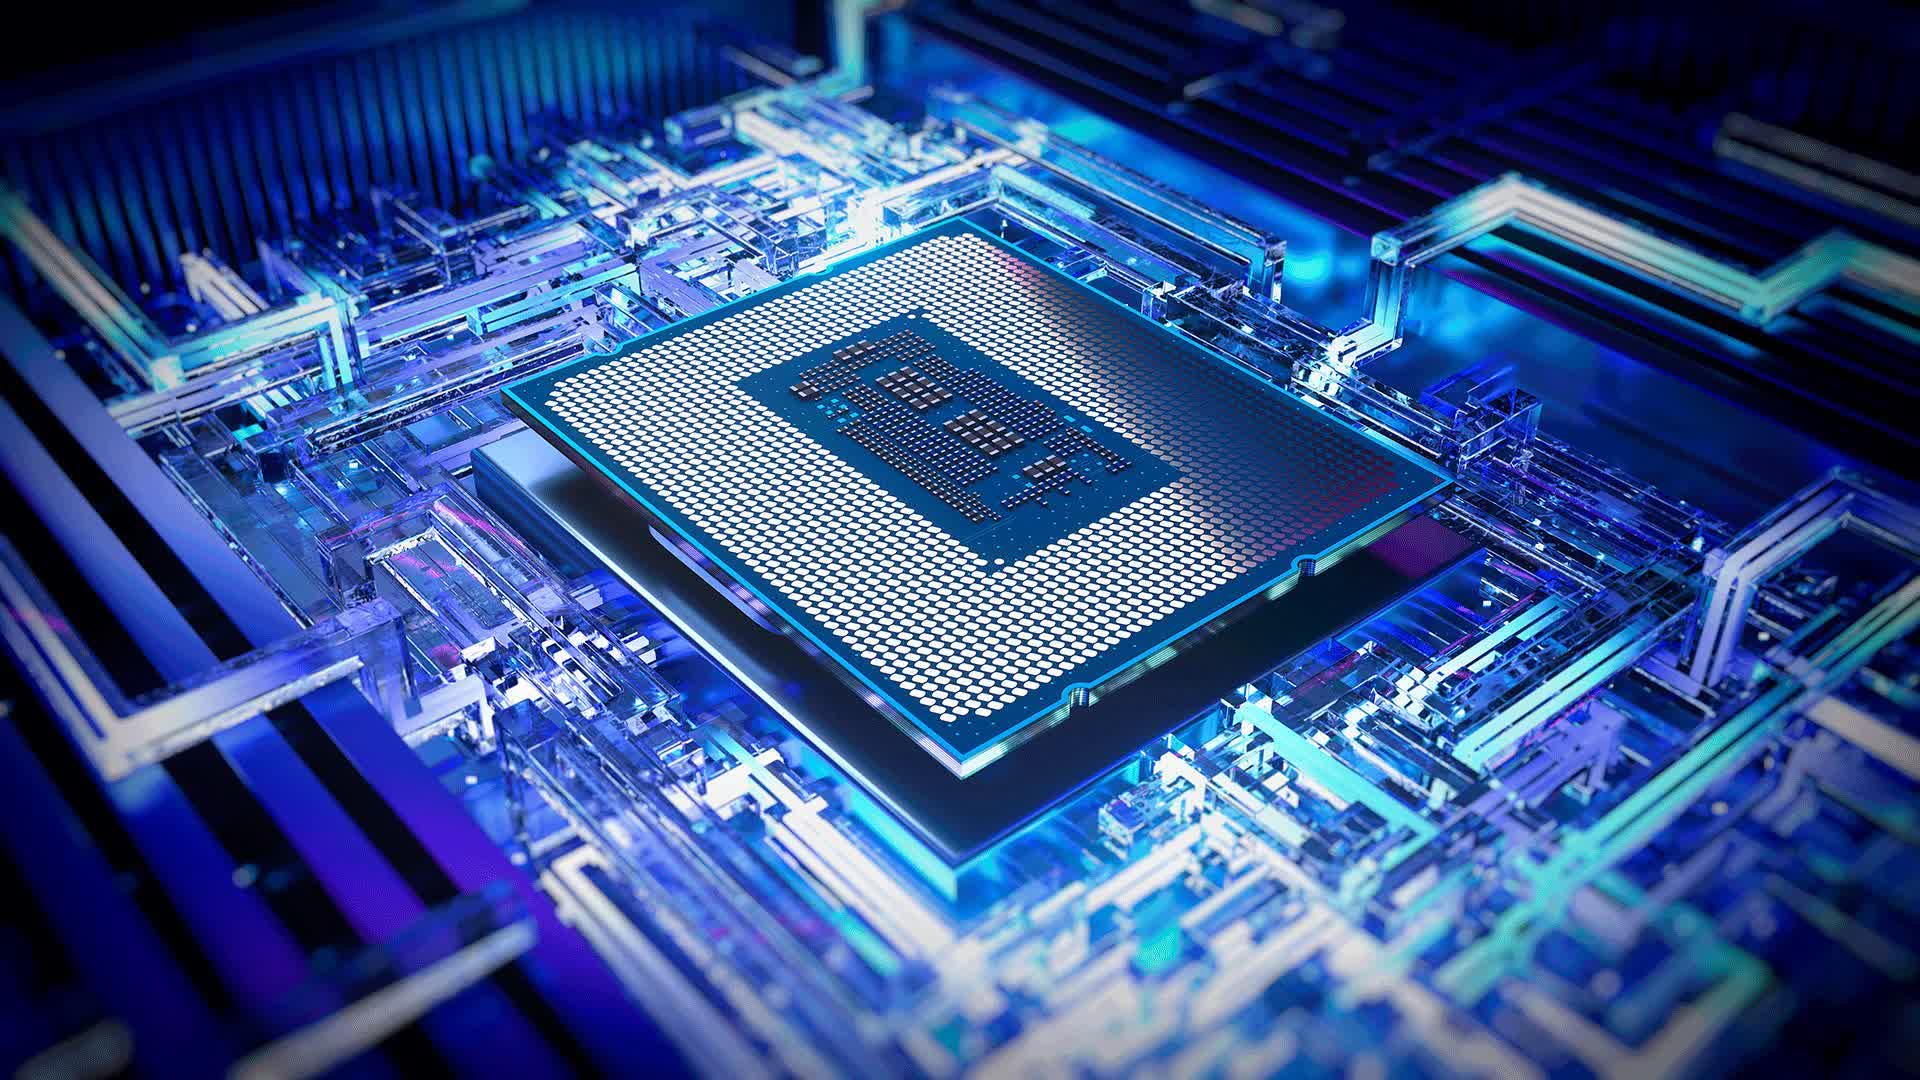 Intel 15th-gen Core Arrow Lake socket will require DDR5 RAM and possibly last until 2026